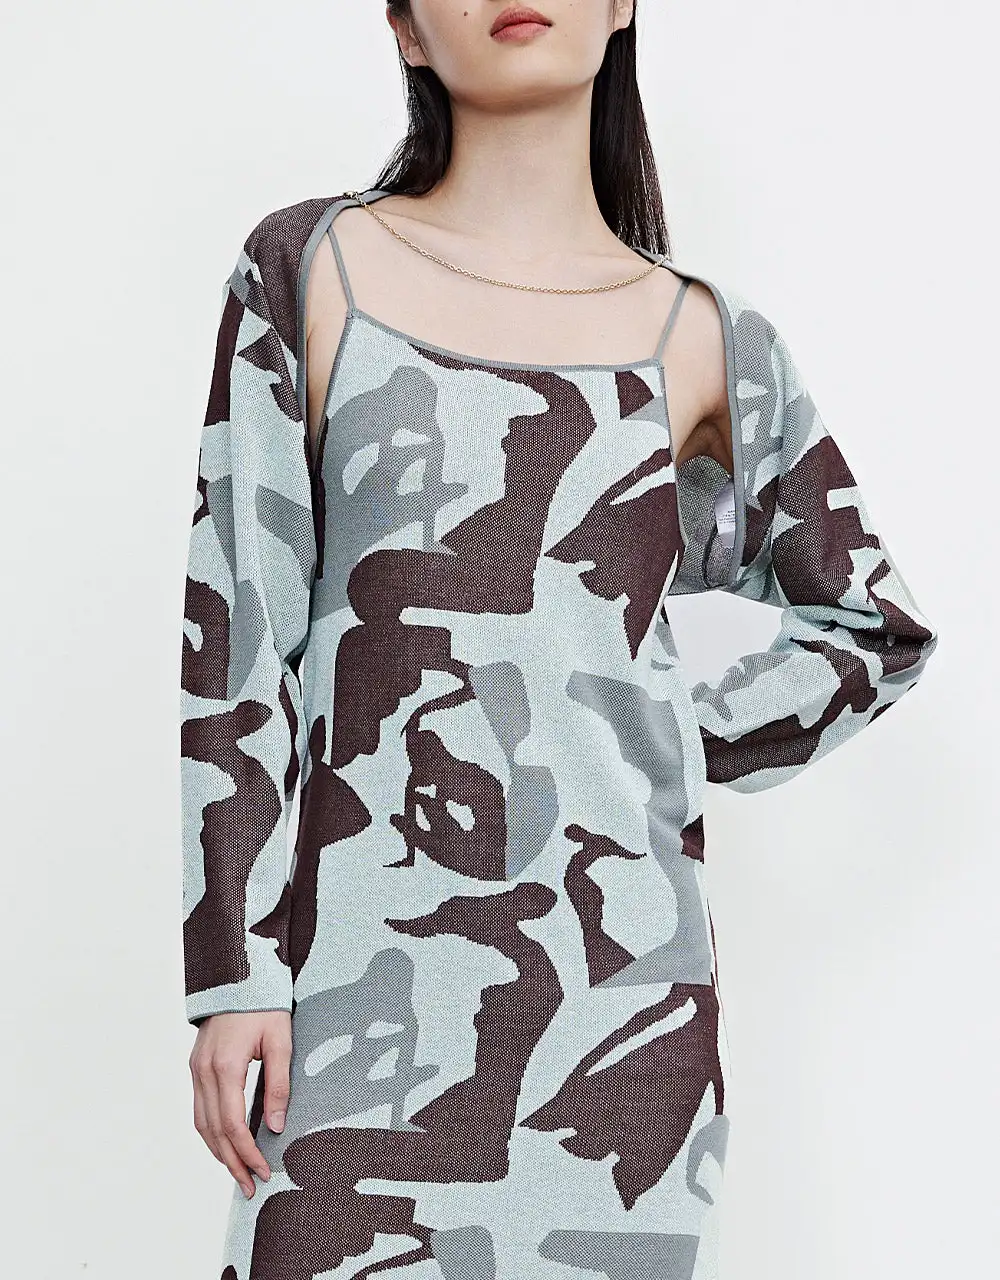 Urban Revivo Off-Shoulder Sleeve Crew Neck Knitted Cardigan Sleeveless Square-Cut Collar Knitted Dress Camouflage Dress Suit